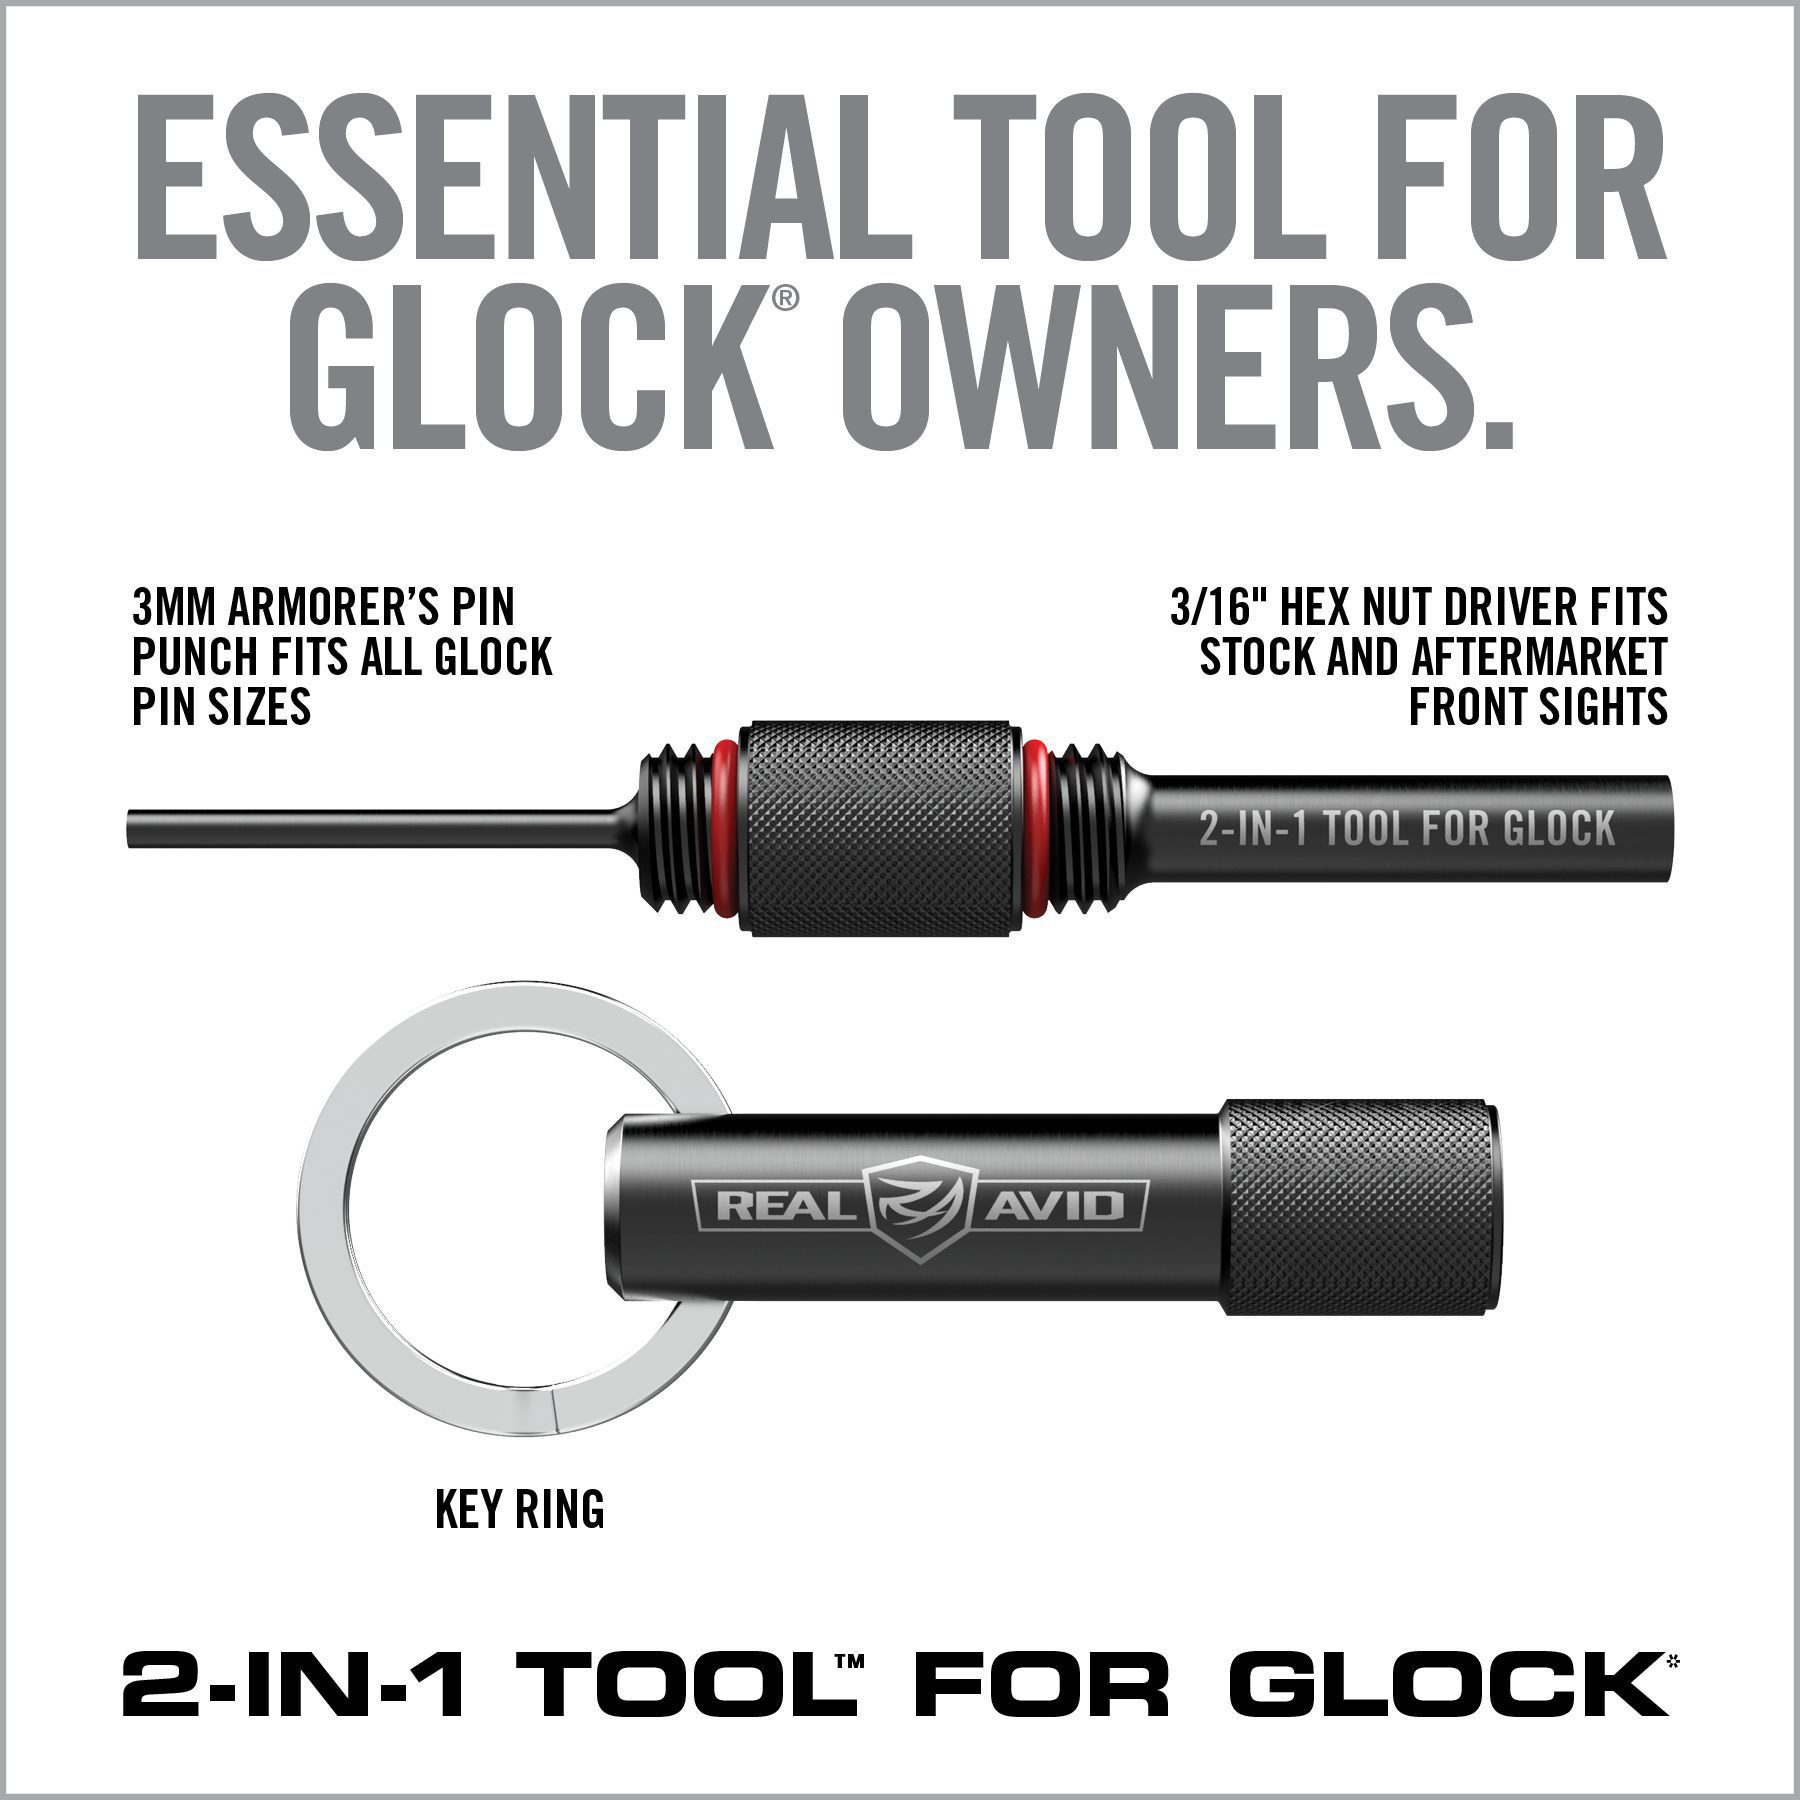 an advertisement for the real avid tool company